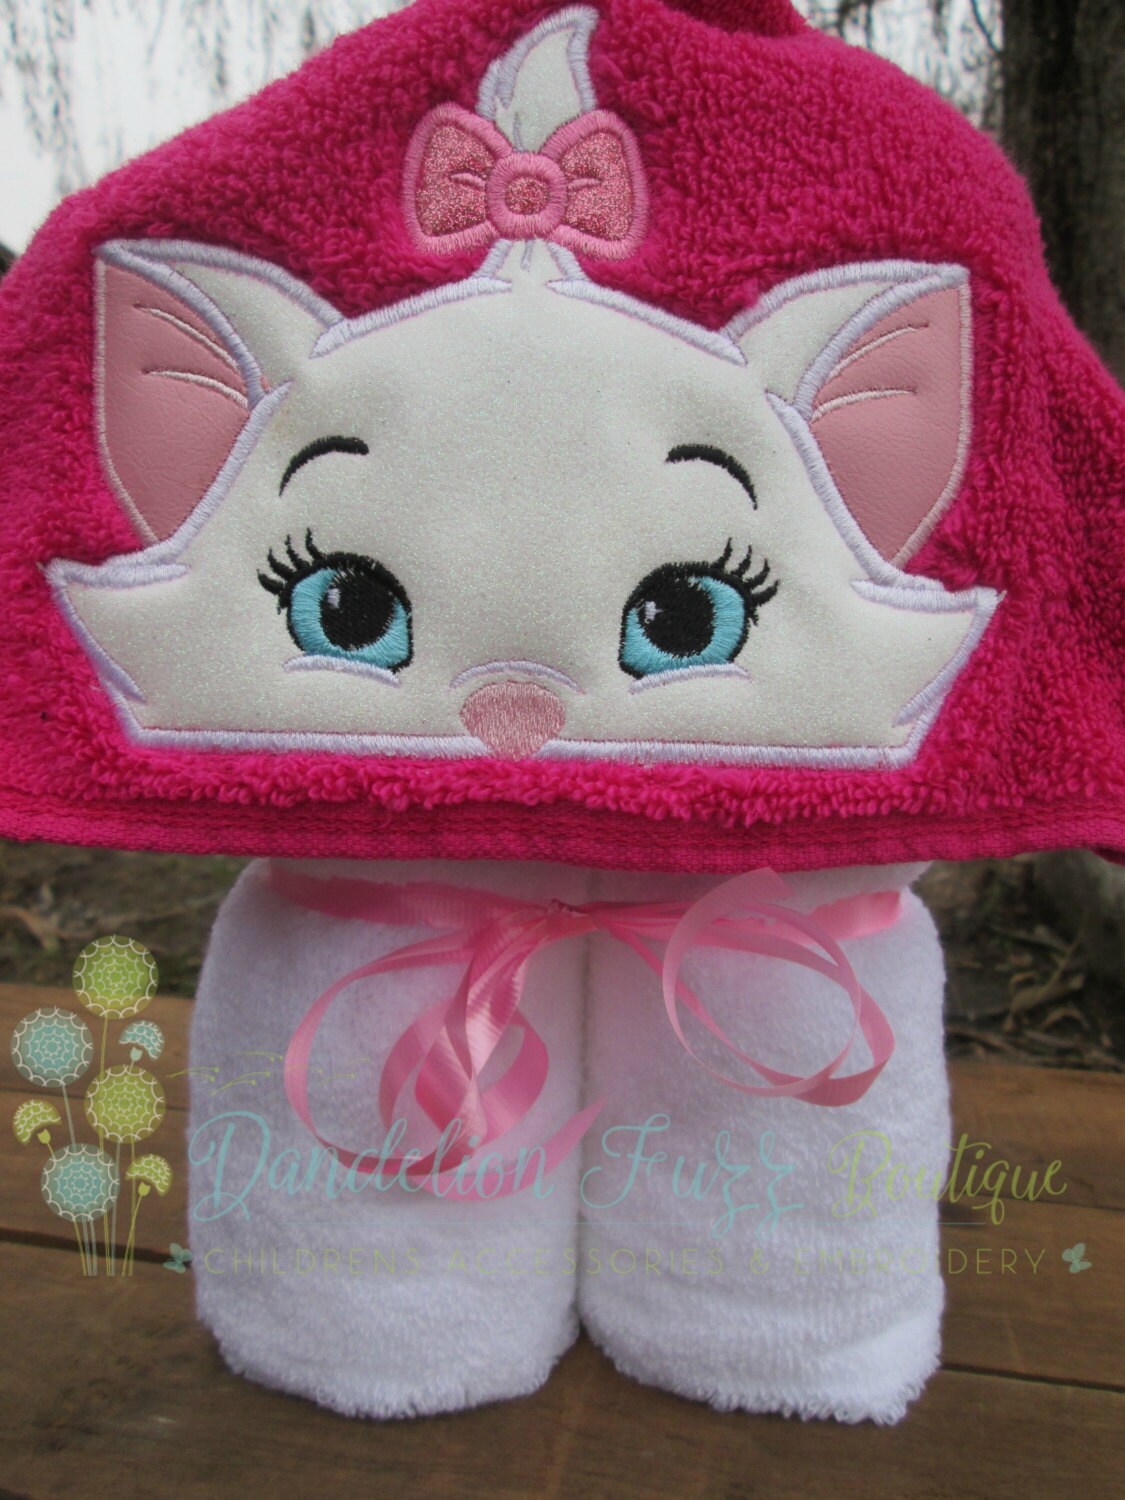 Marie Cat Hooded Towel, Beach Towel, Pool Towel, Aristocats Birthday, Cat Birthday, Party Favors, Birthday Party Favor